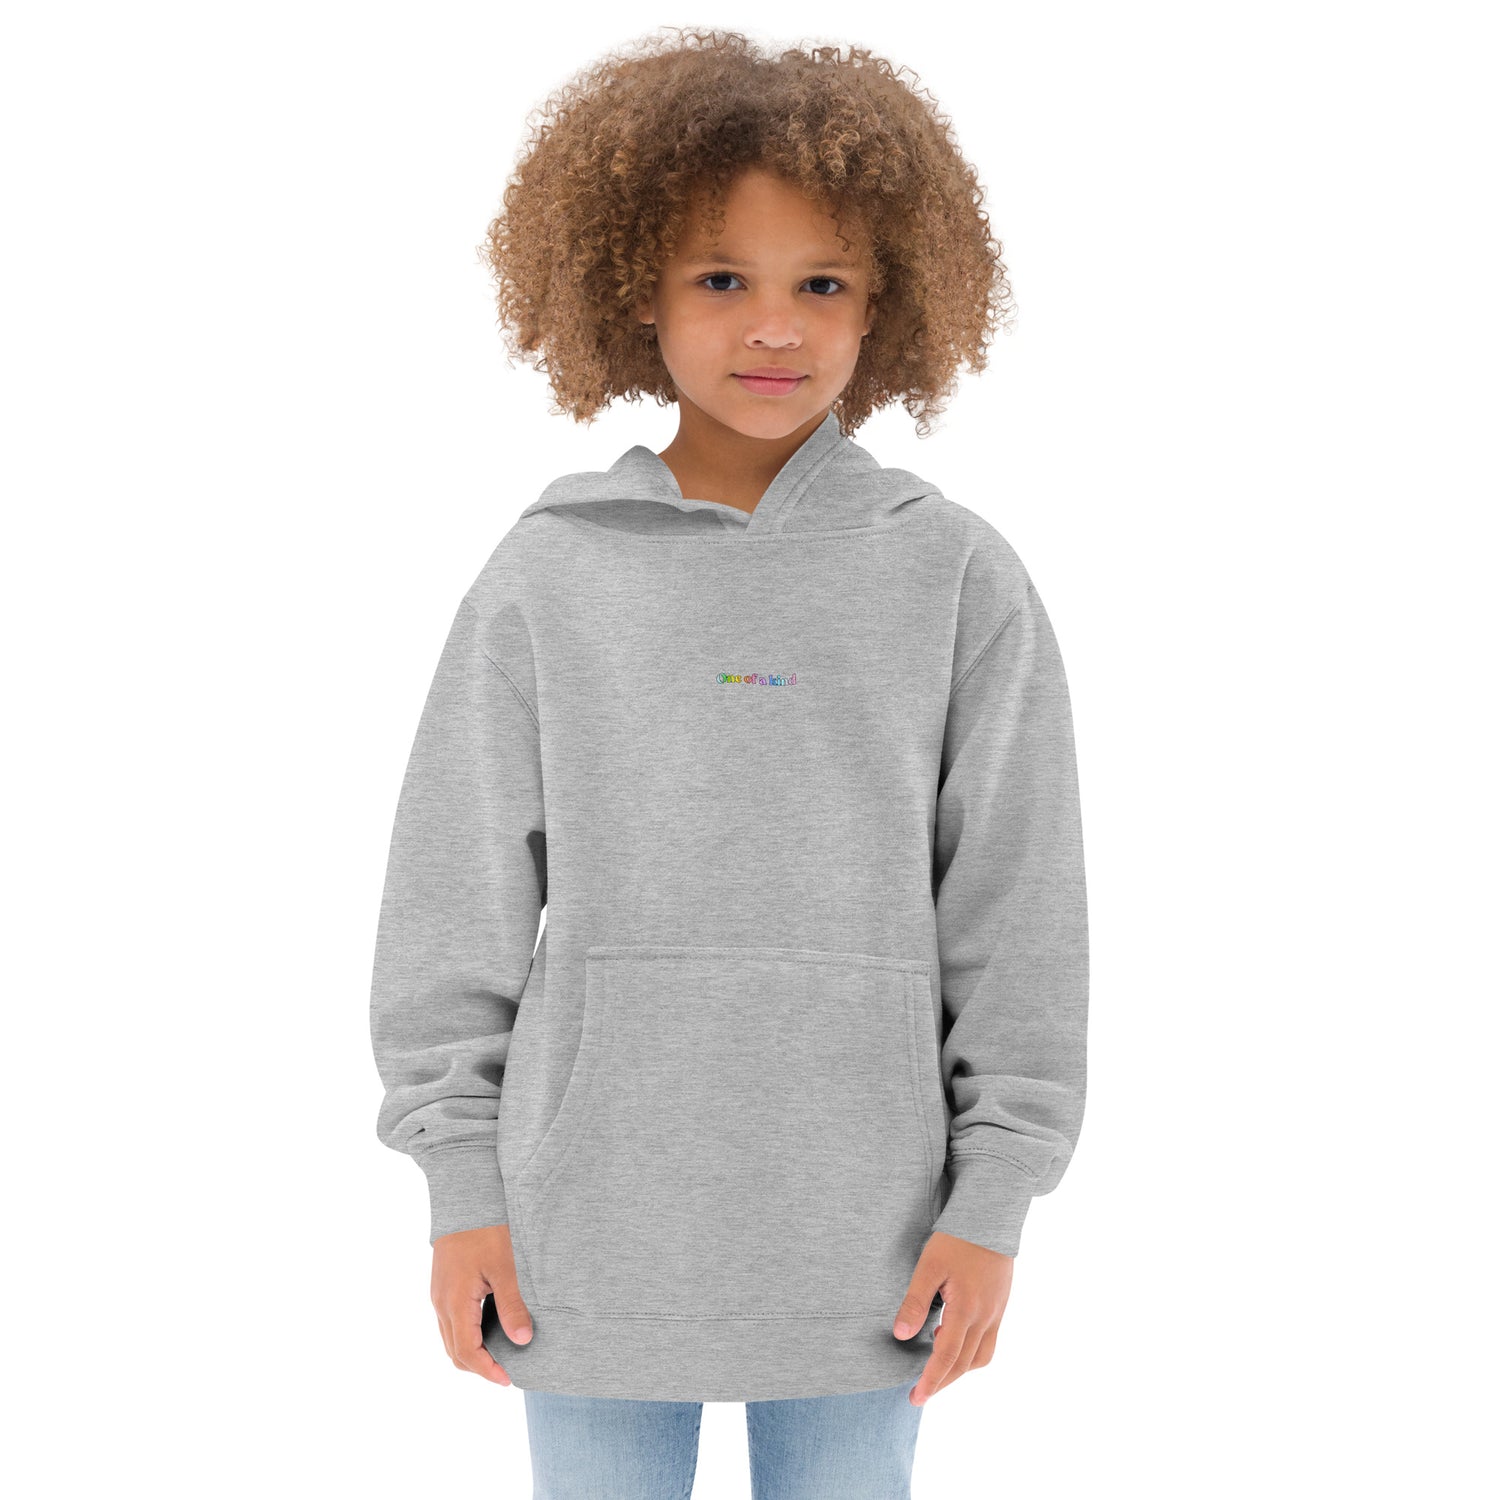 Front of Grey Kidswear hoodie featuring " One of a kind" design.